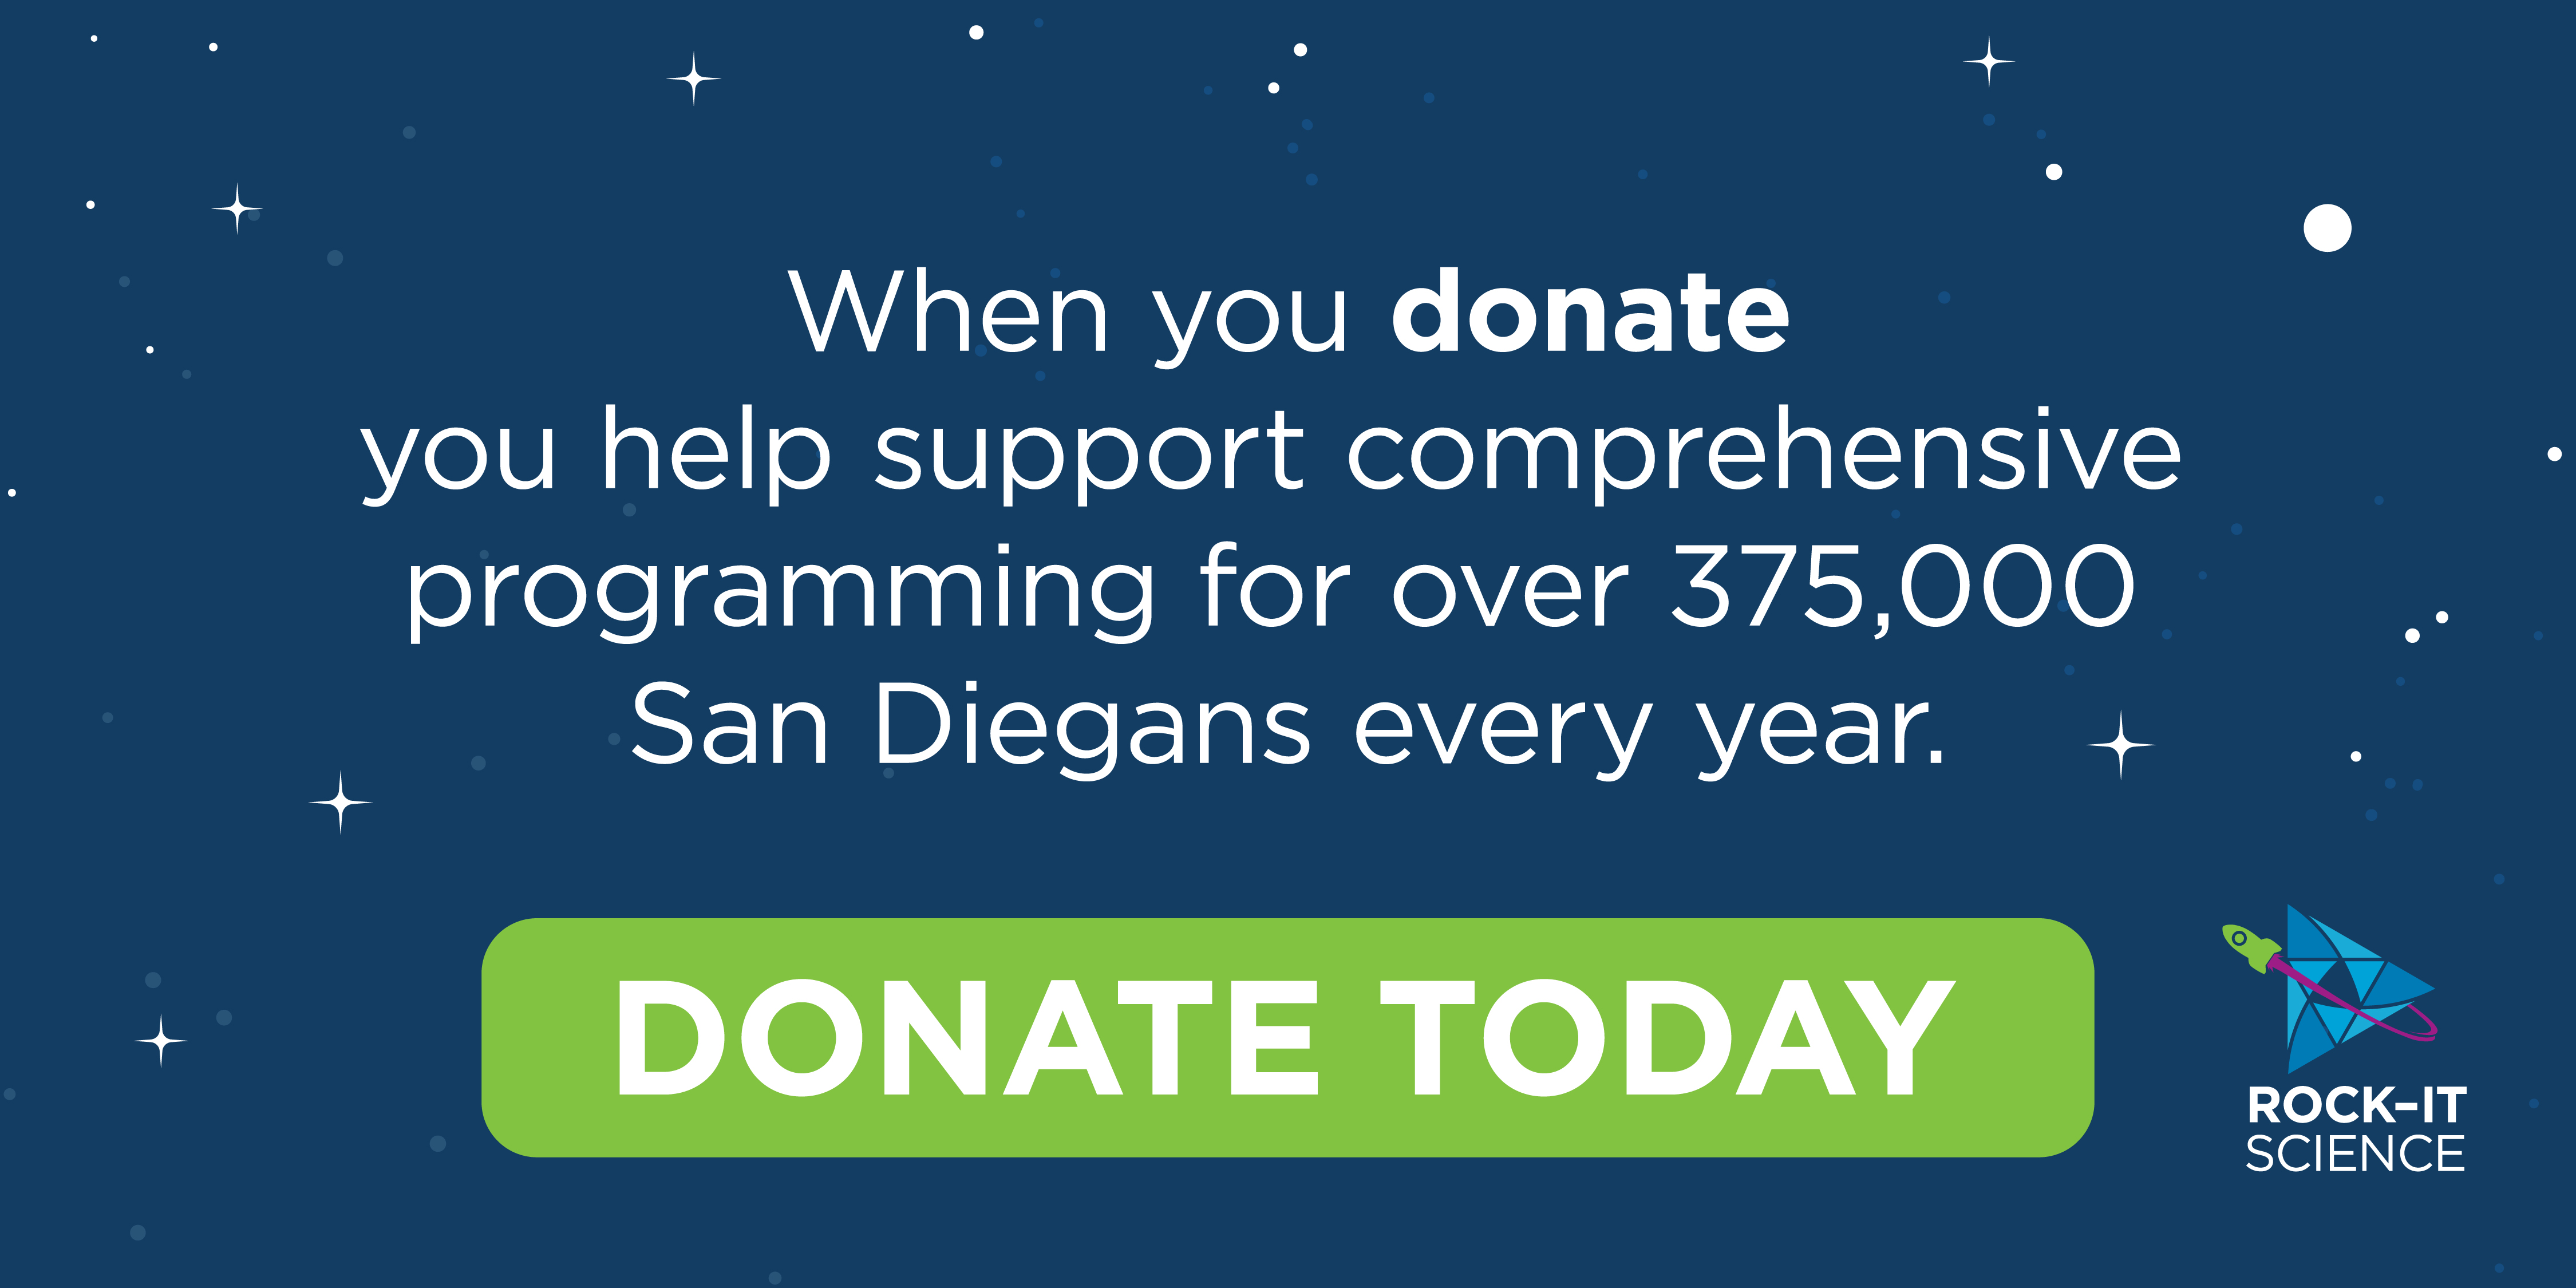 A dark blue graphic with white text and a green button that says Donate Today